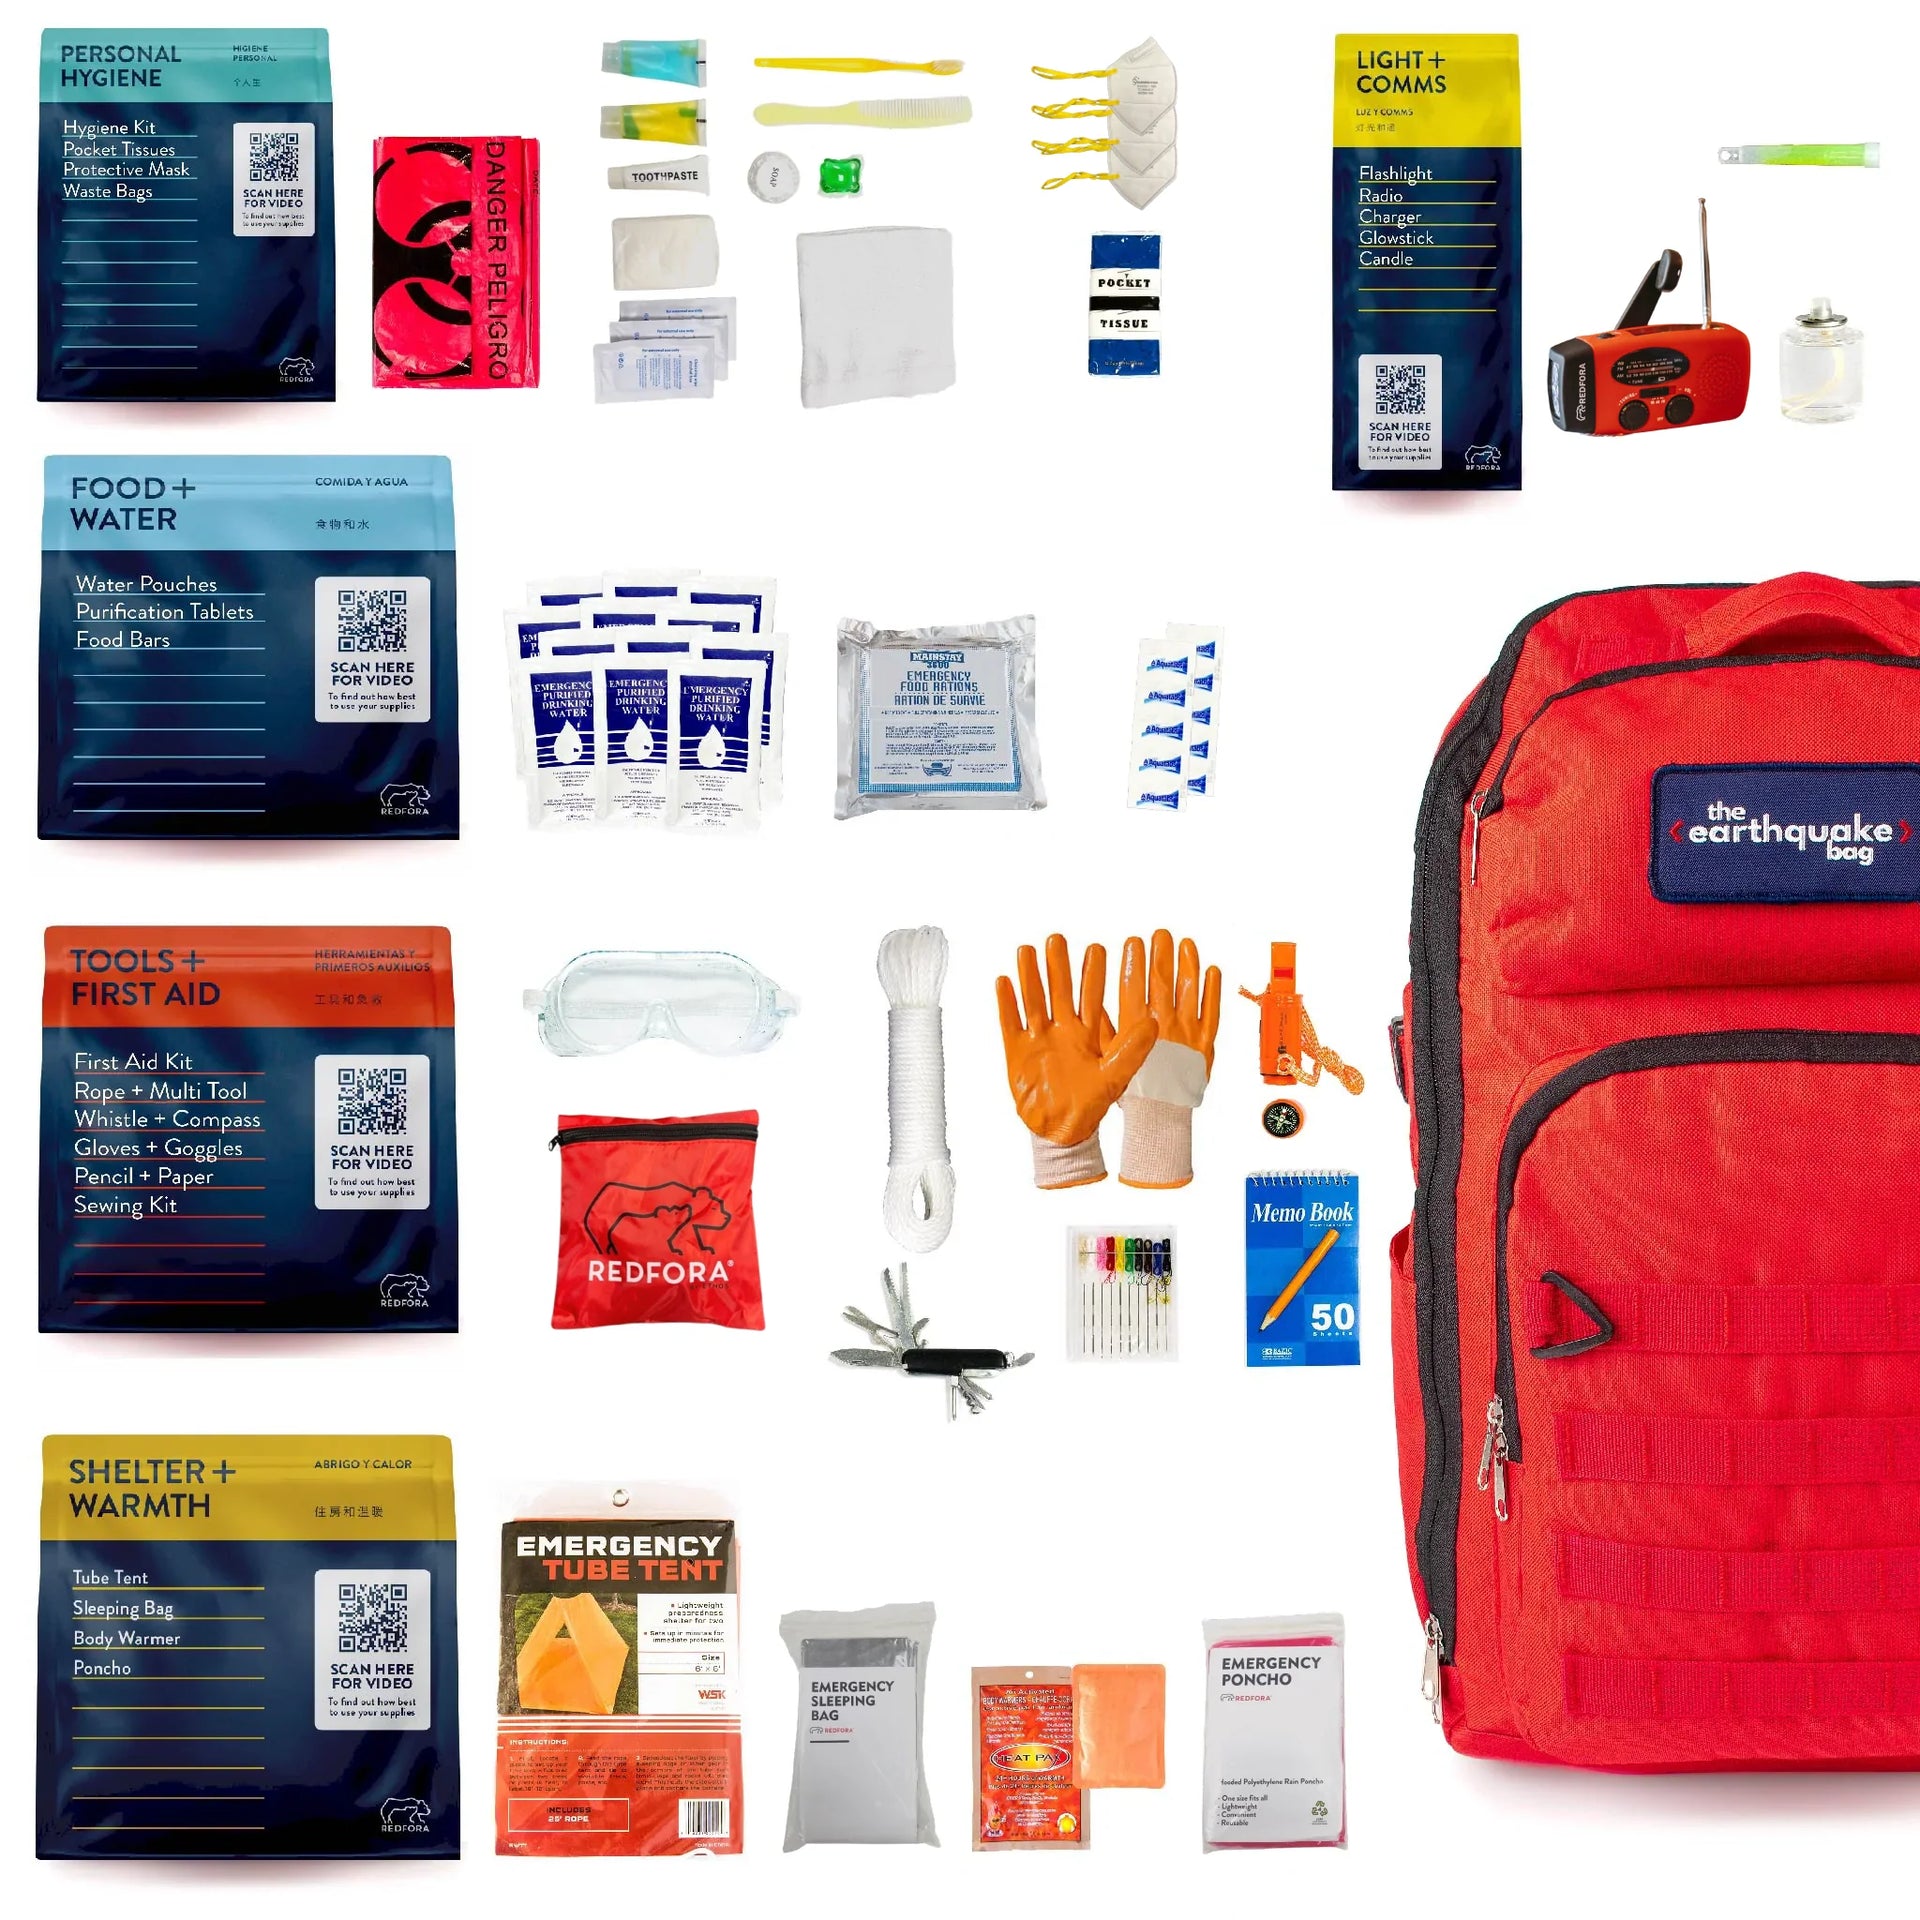 What to Pack in an Emergency Kit for Any Disaster